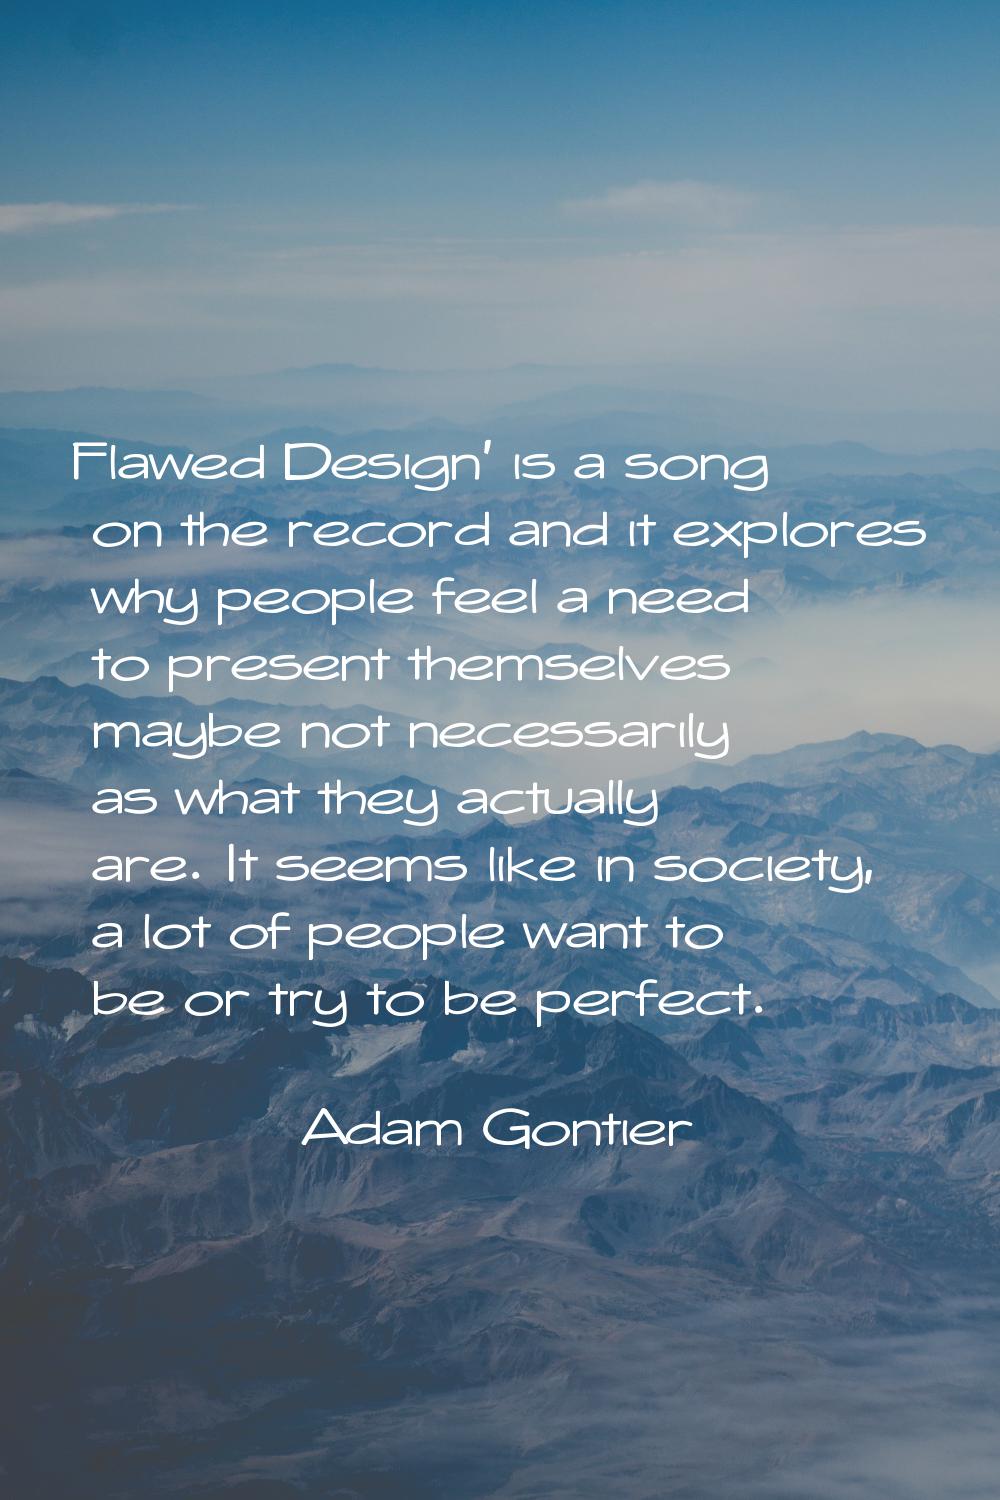 Flawed Design' is a song on the record and it explores why people feel a need to present themselves